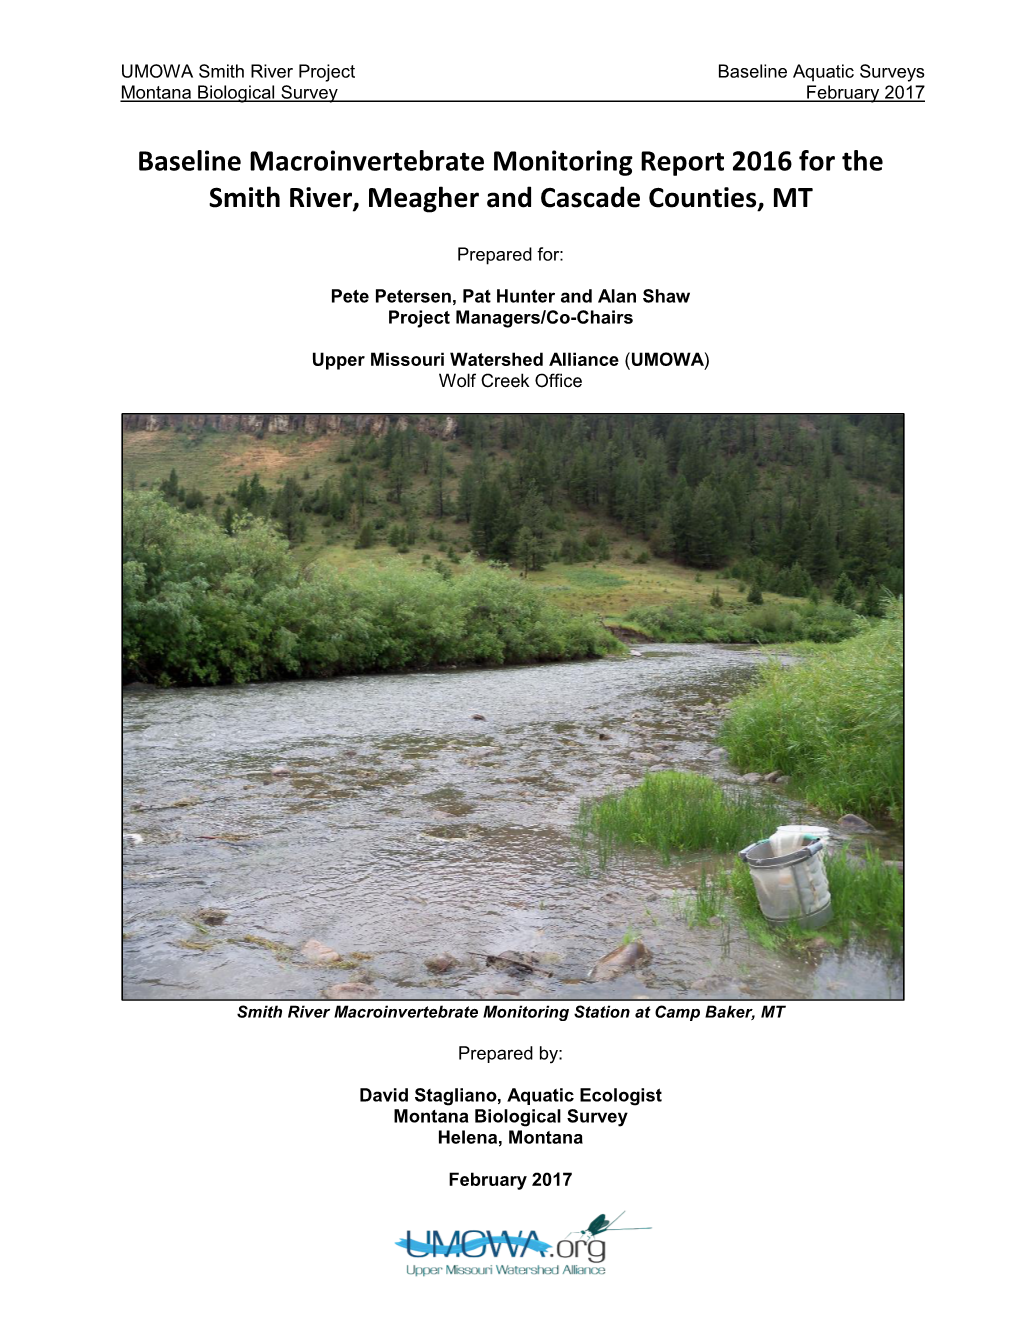 Baseline Macroinvertebrate Monitoring Report 2016 for the Smith River, Meagher and Cascade Counties, MT